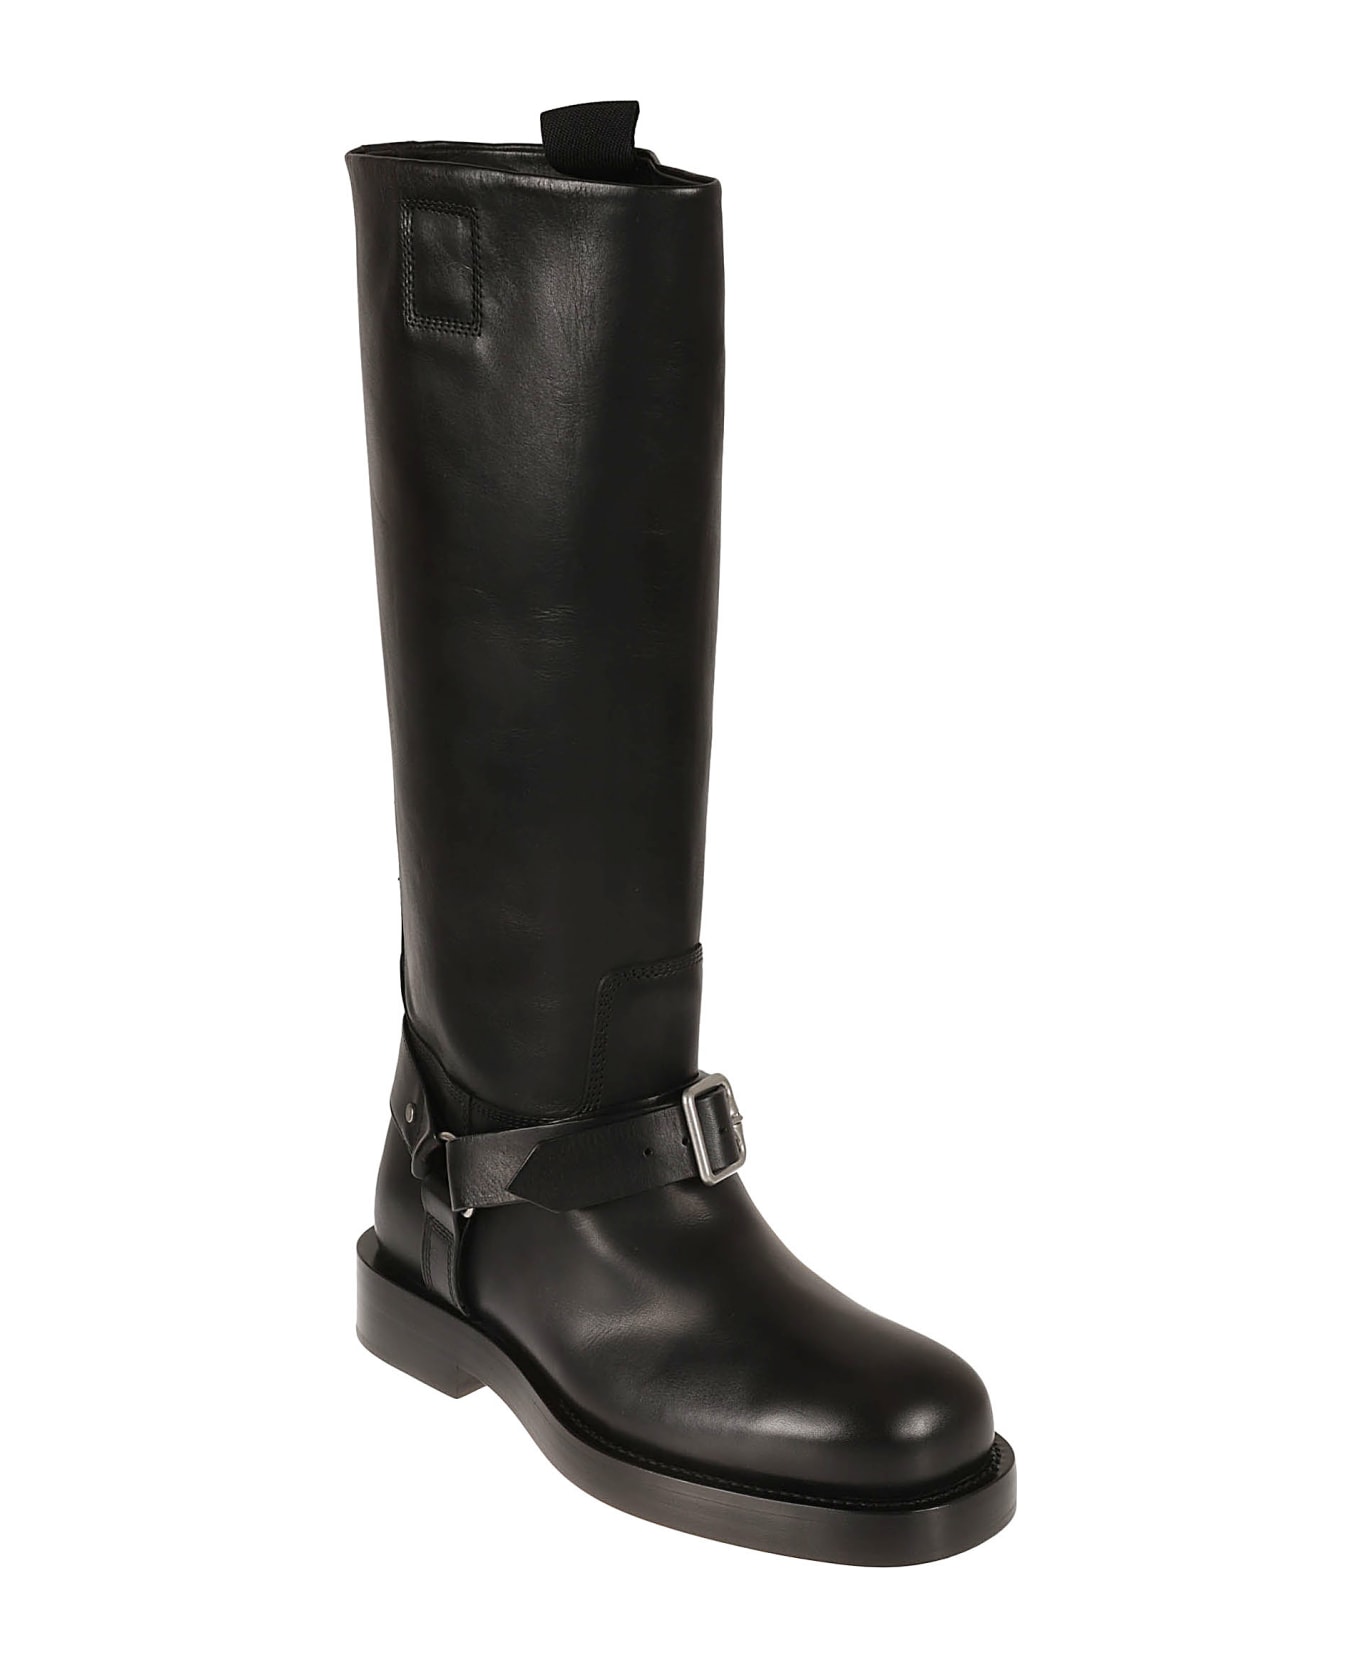 Burberry Ankle Buckle Strap Boots - Black